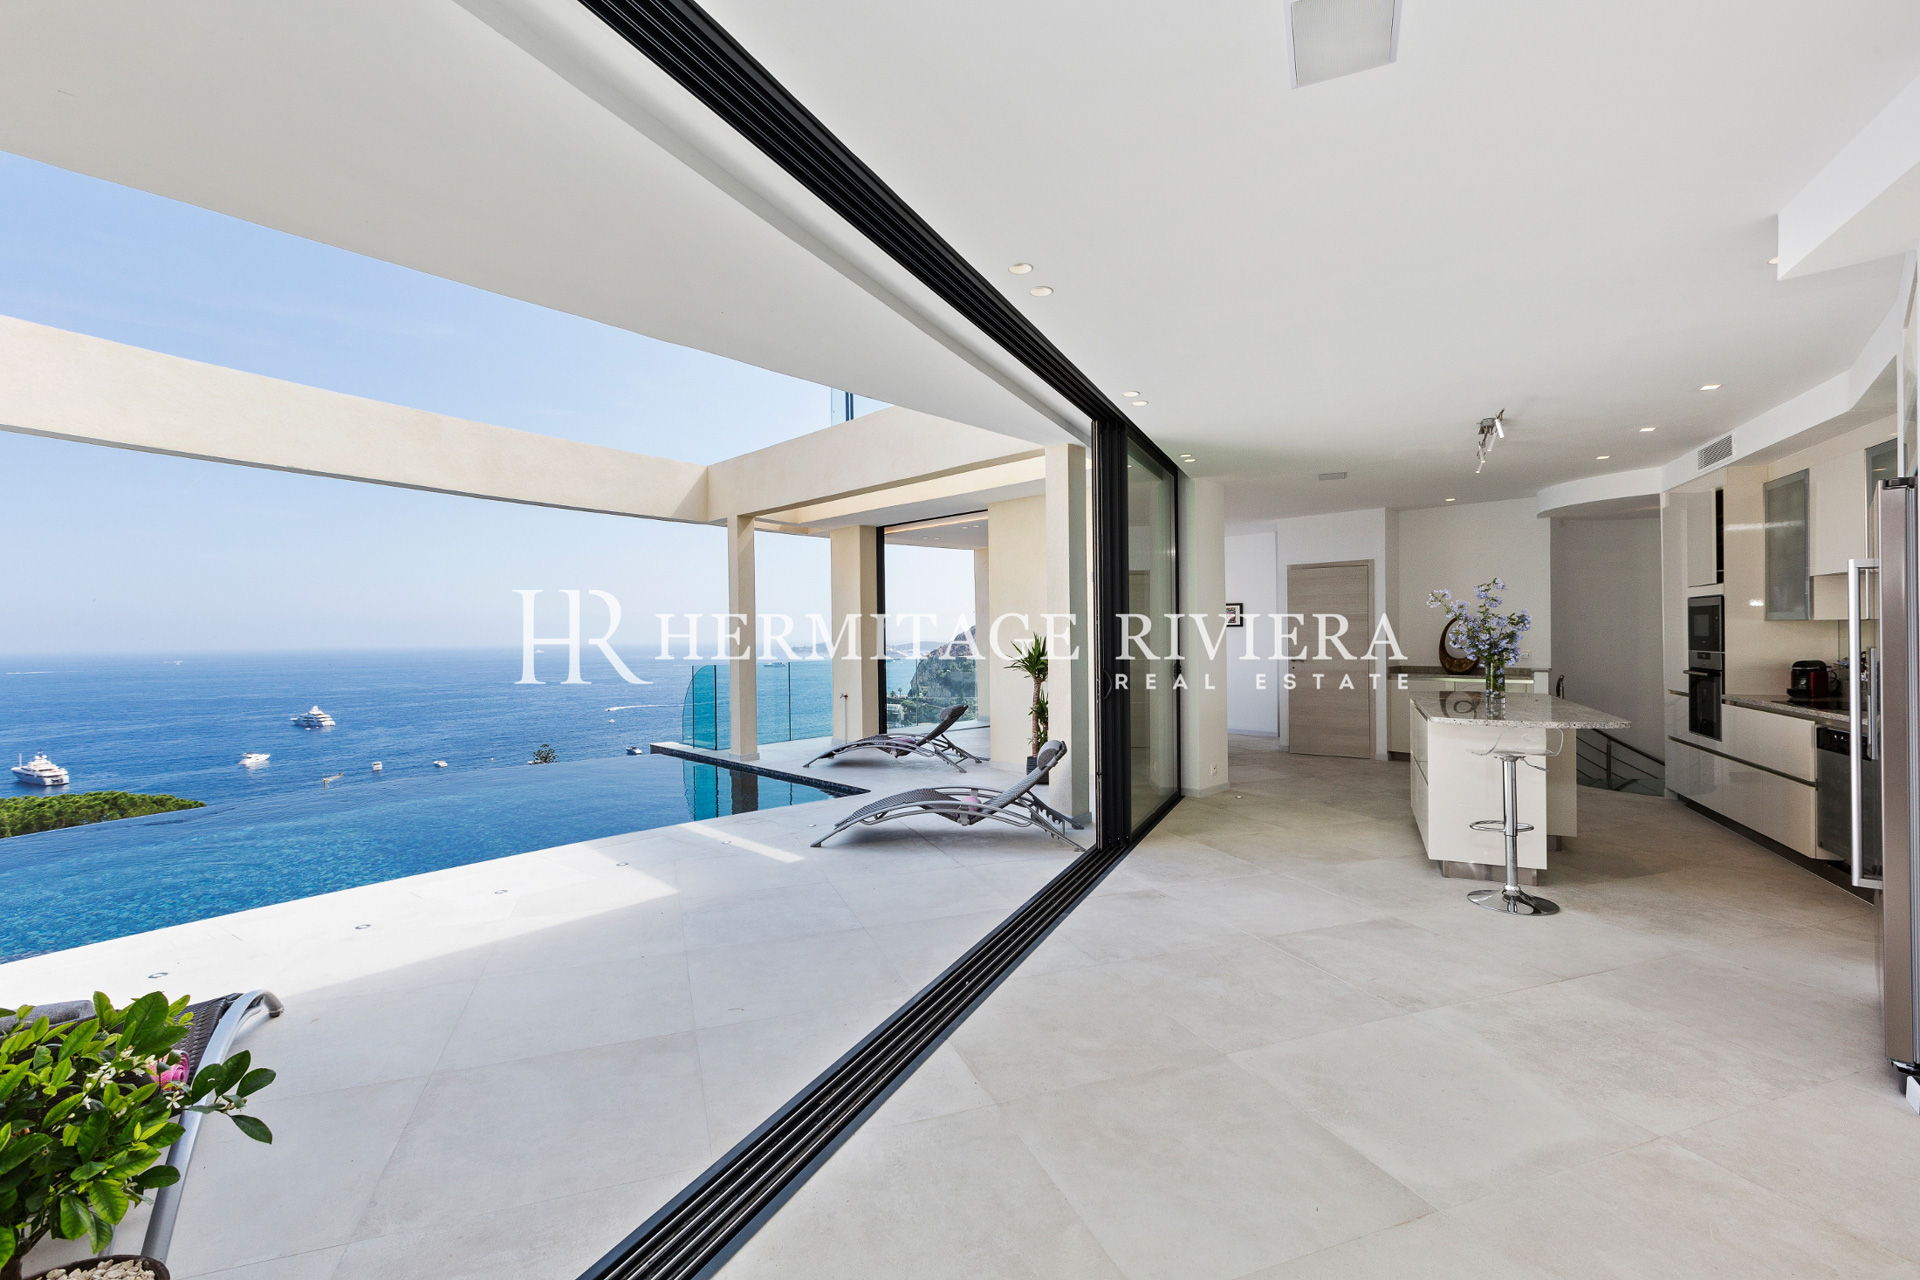 Contemporary villa in walking distance to beach (image 7)